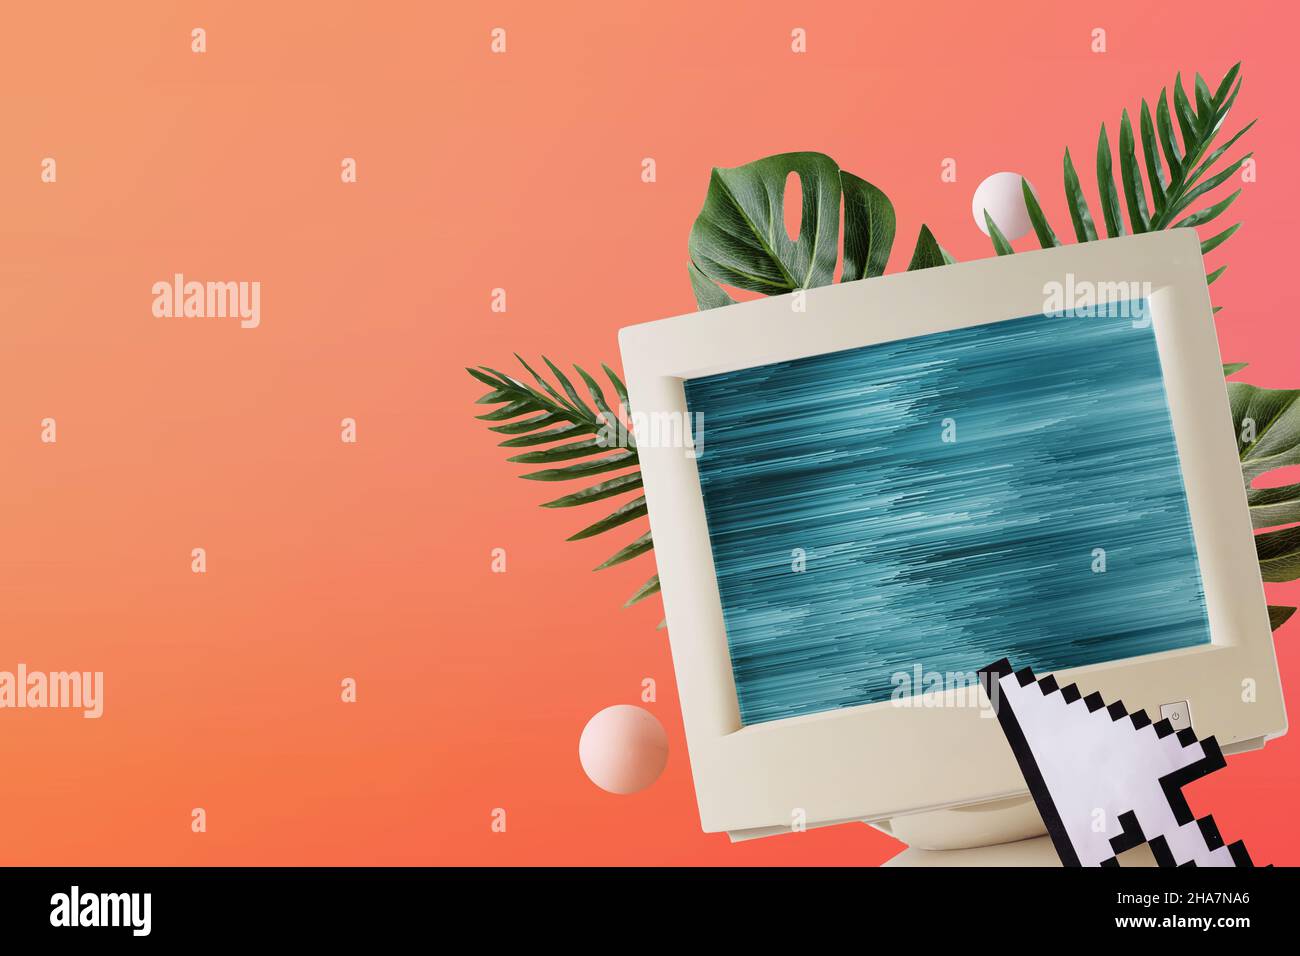 Collage nostalgia surreal graphic retro computer pixel mouse cursor and glitch on screen with tropical palm leaves. Vaporwave of 90s aesthetics. Stock Photo